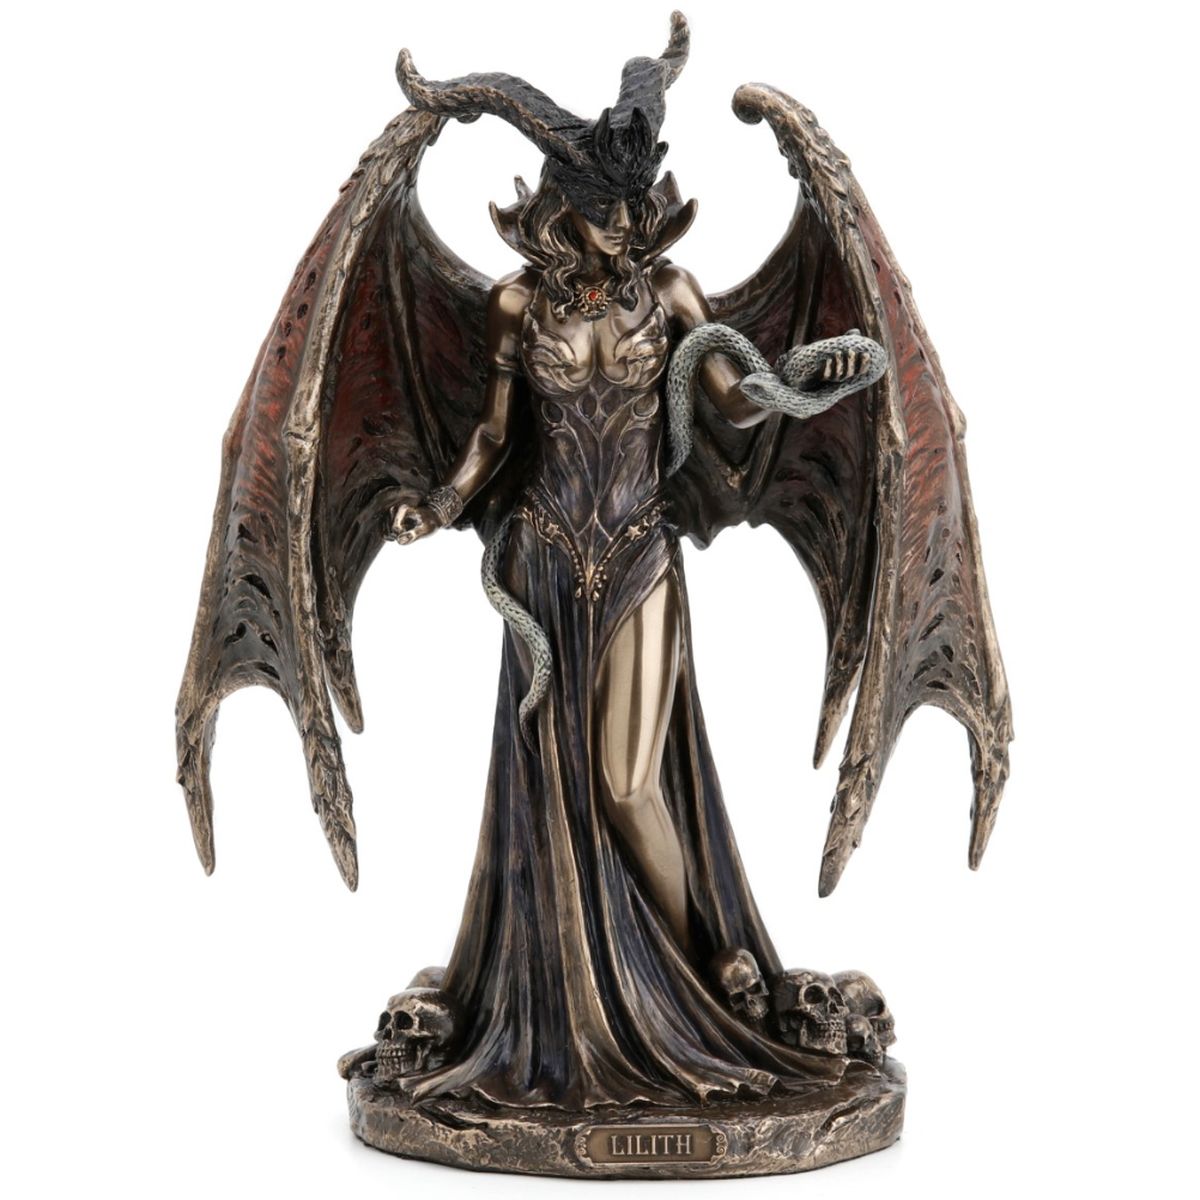 Lilith statuette in bronze-look resin